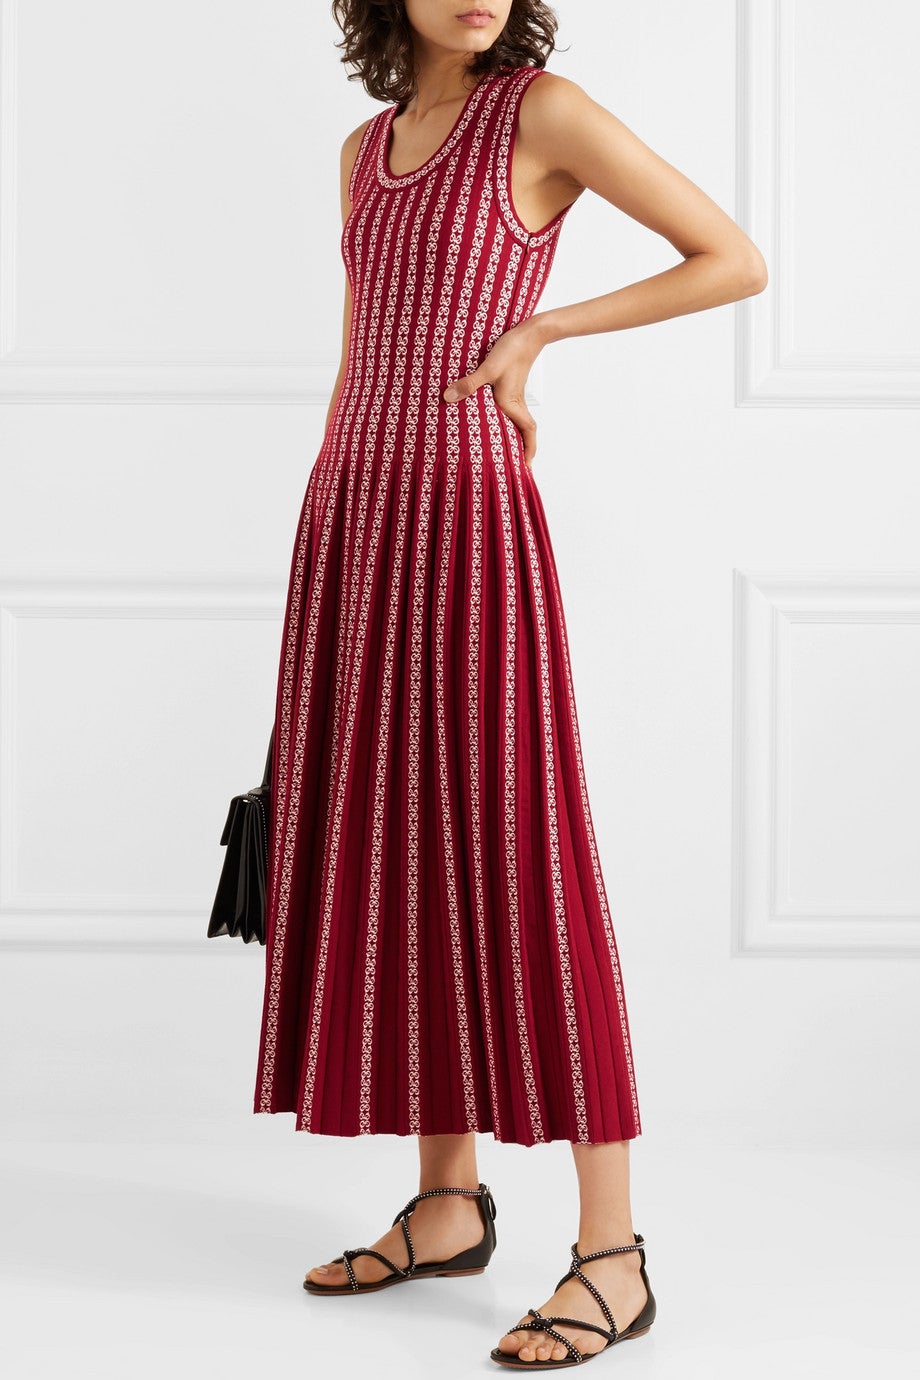 Favourite Picks From The Net-A-Porter Sale